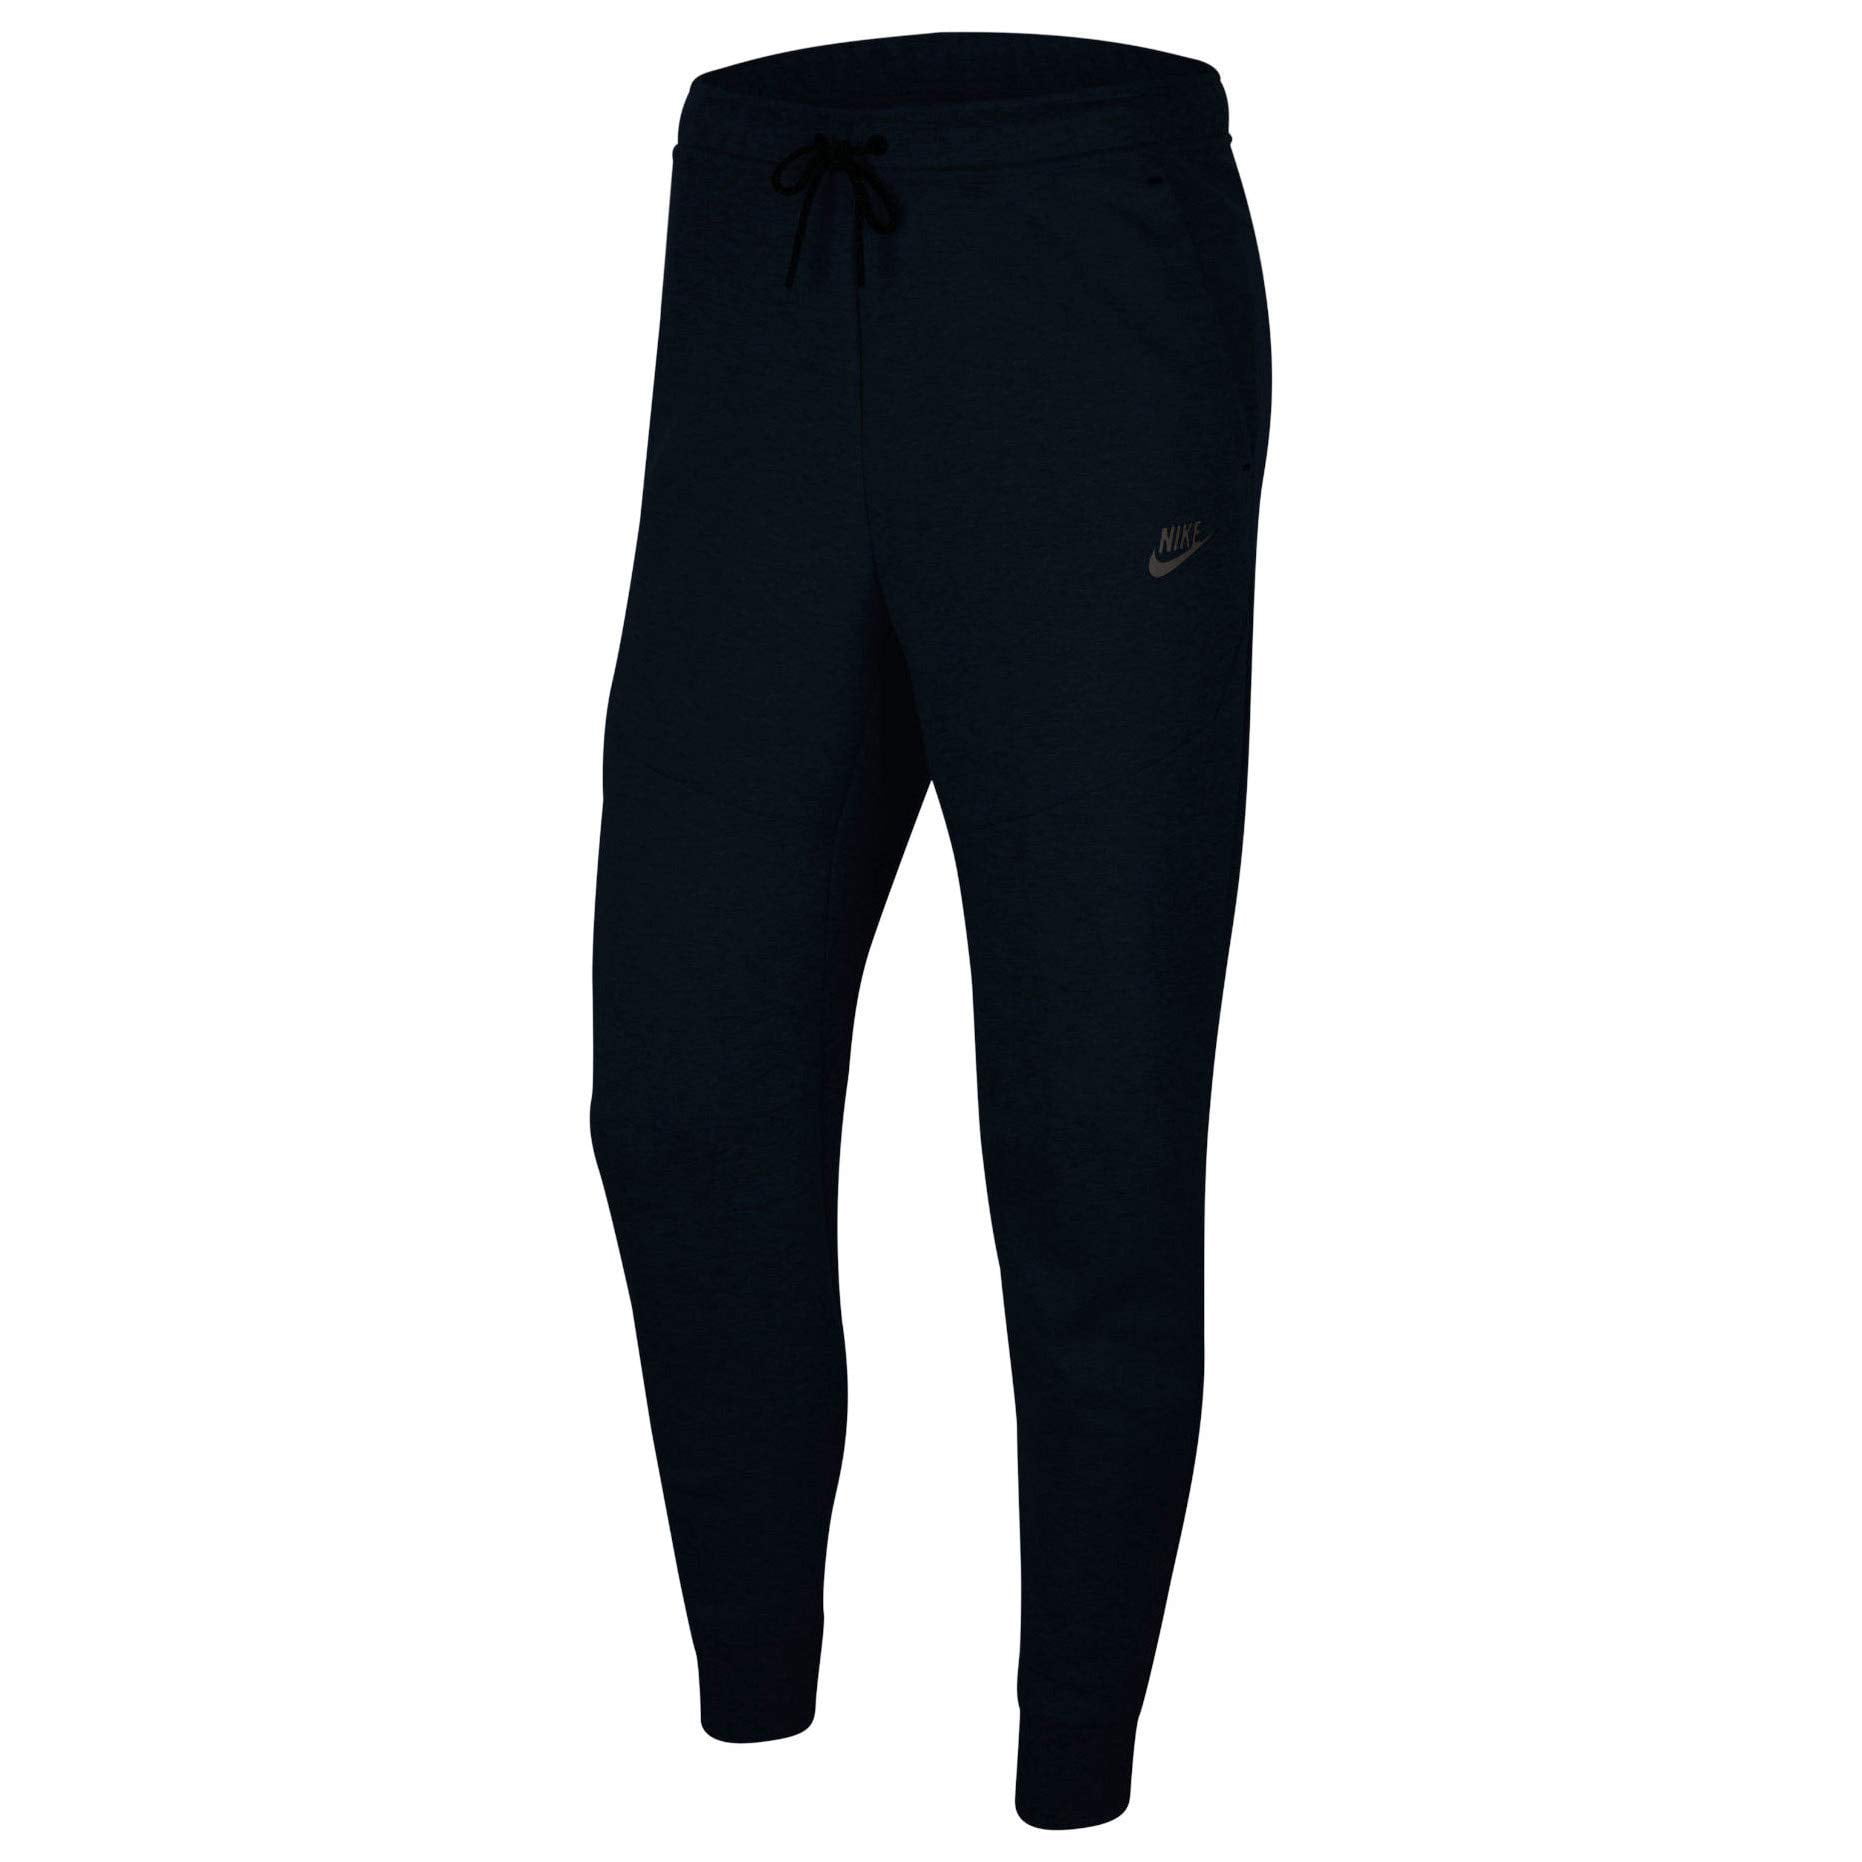 Under Armour Men's Qualifier Hybrid Warm-Up Pant GRAYWHITE MD 